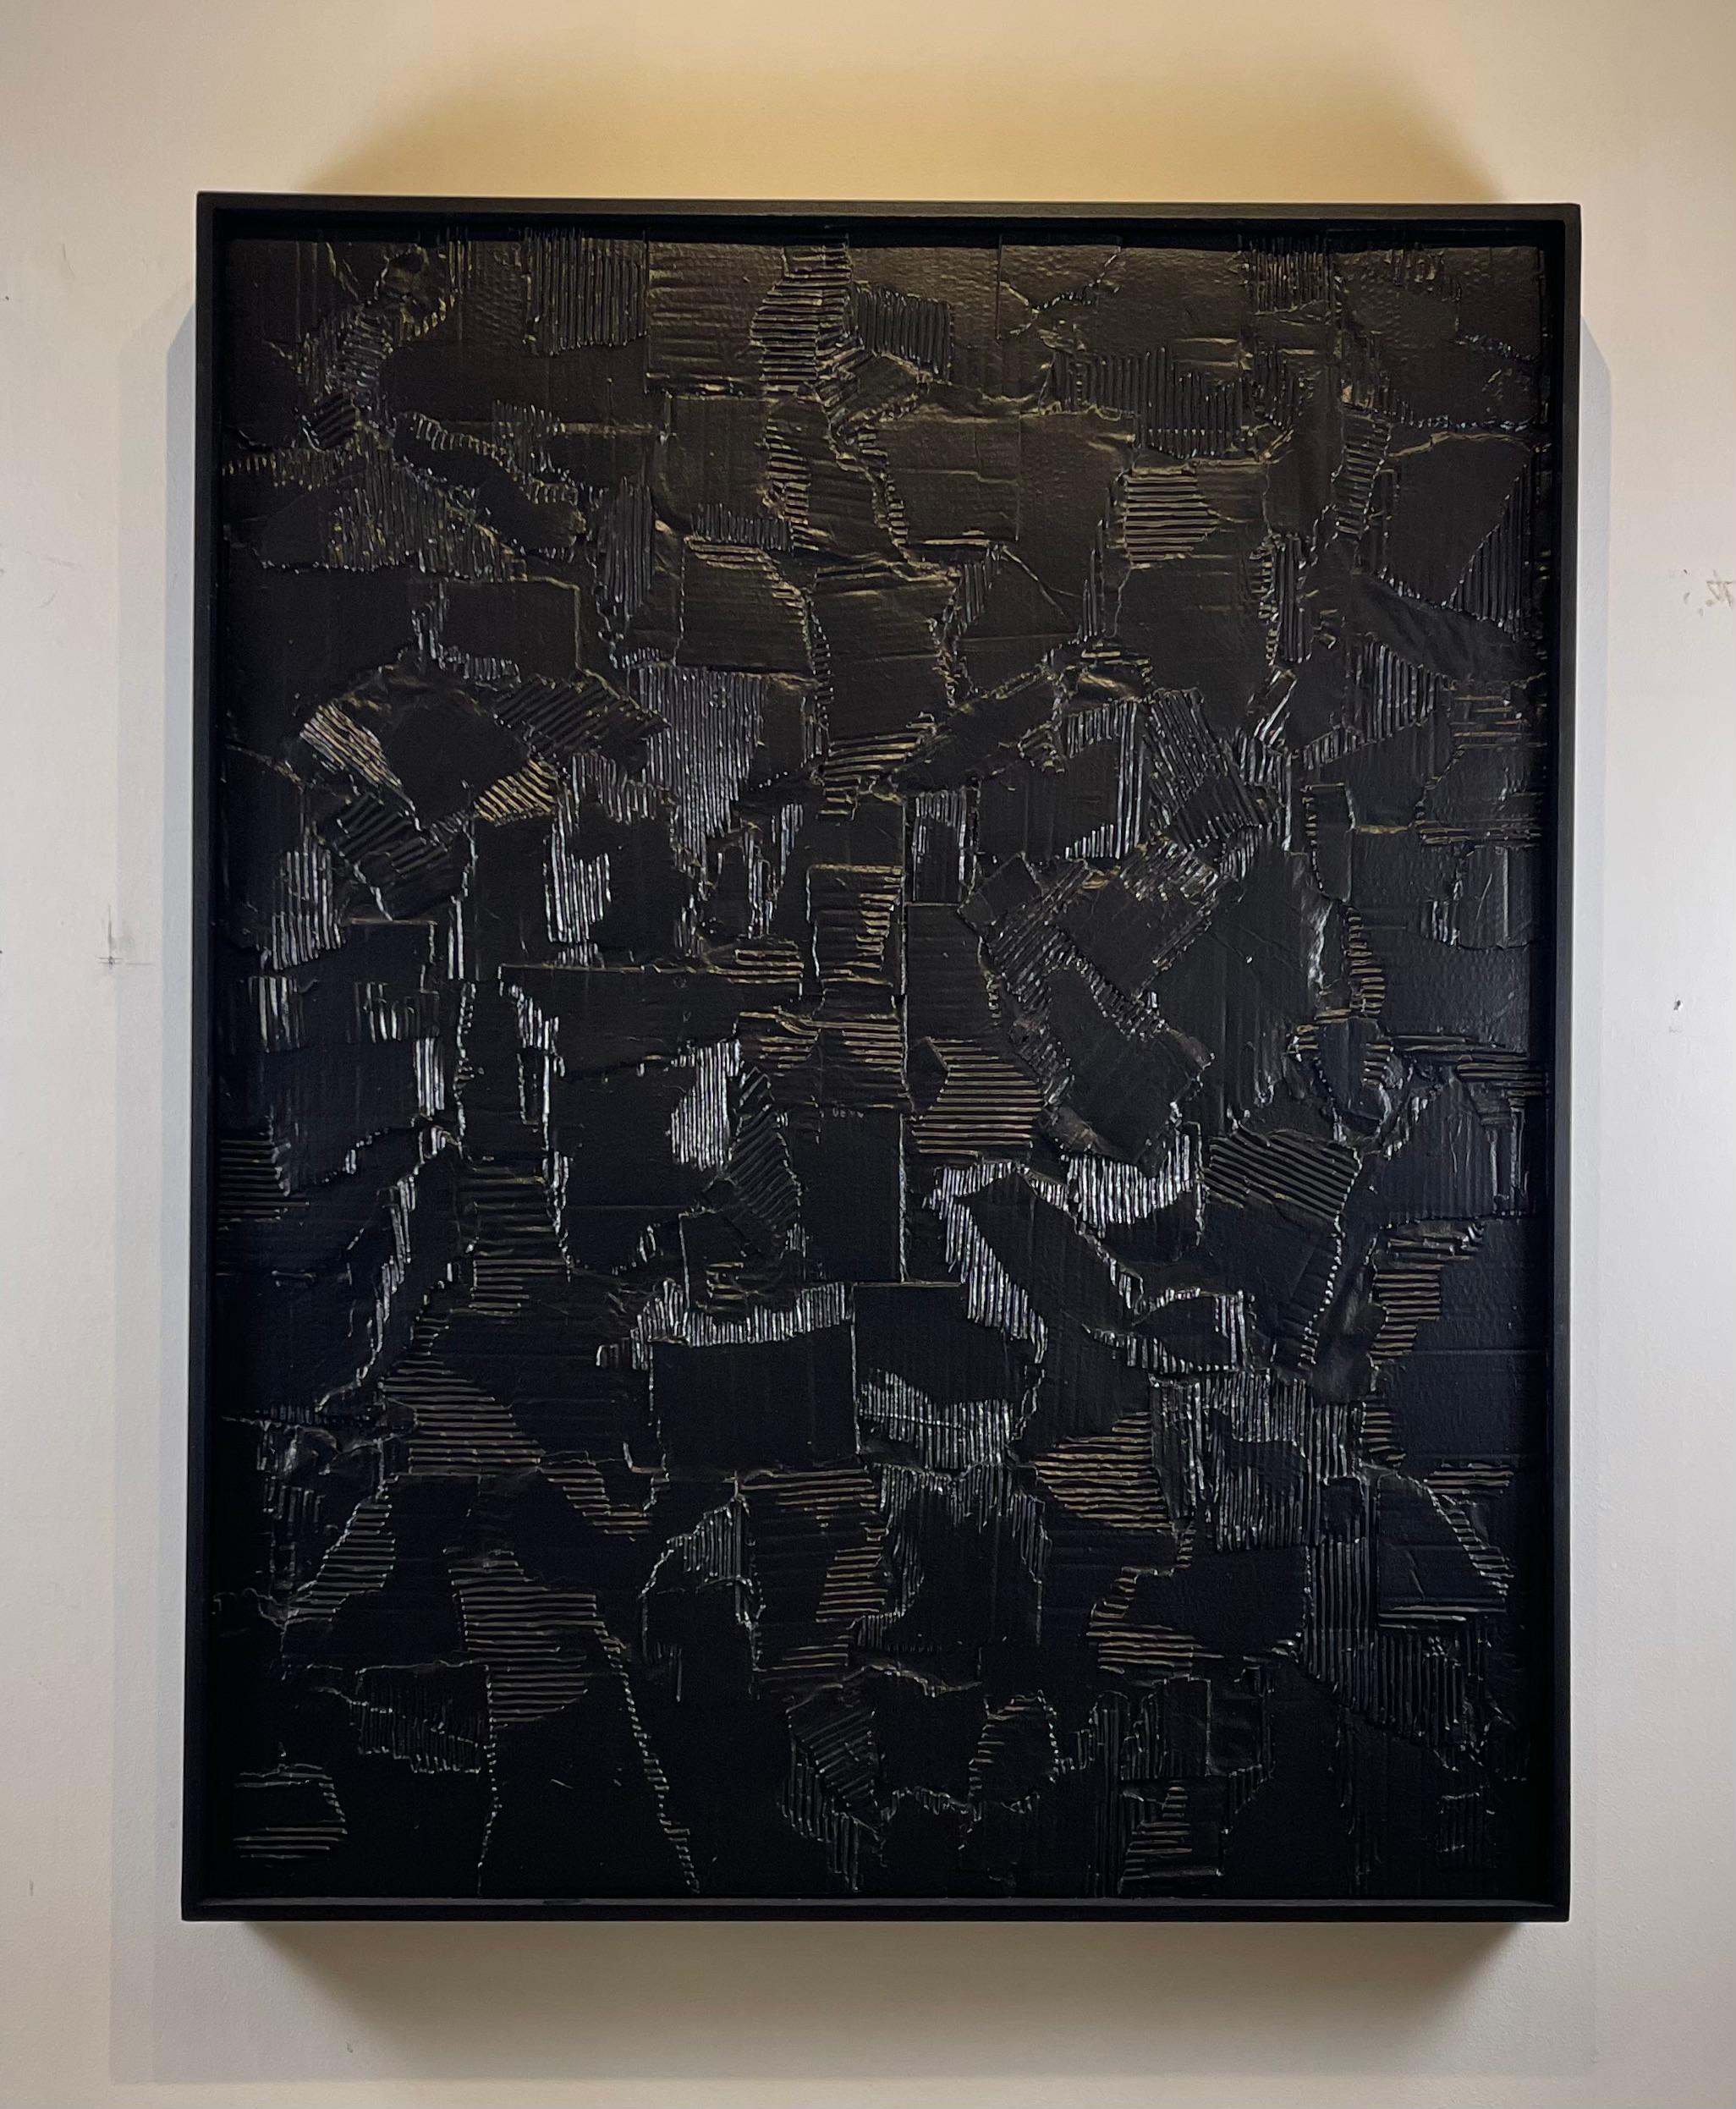 ' Slate Black Noon ' by artist Jordan Tabachnik

Mix media, paper, on artist board. Mounted with a frame in the same colour as the artwork.

The series is available for commissions, please inquire with the studio thru 1stdibs.

Due to the size and